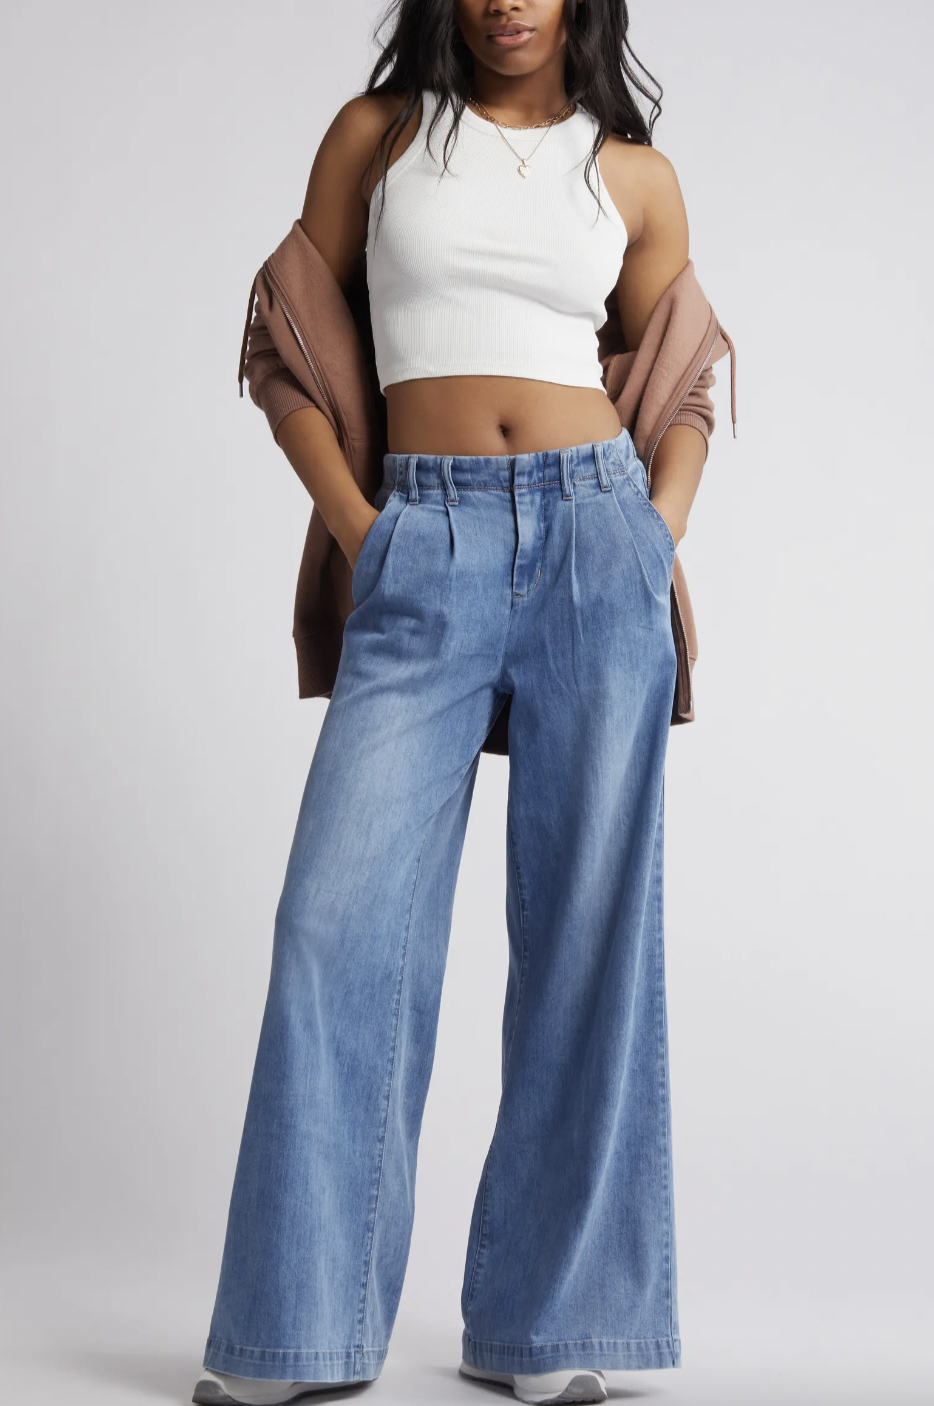 Woman in white crop top and wide-leg jeans, holding a jacket over her shoulder